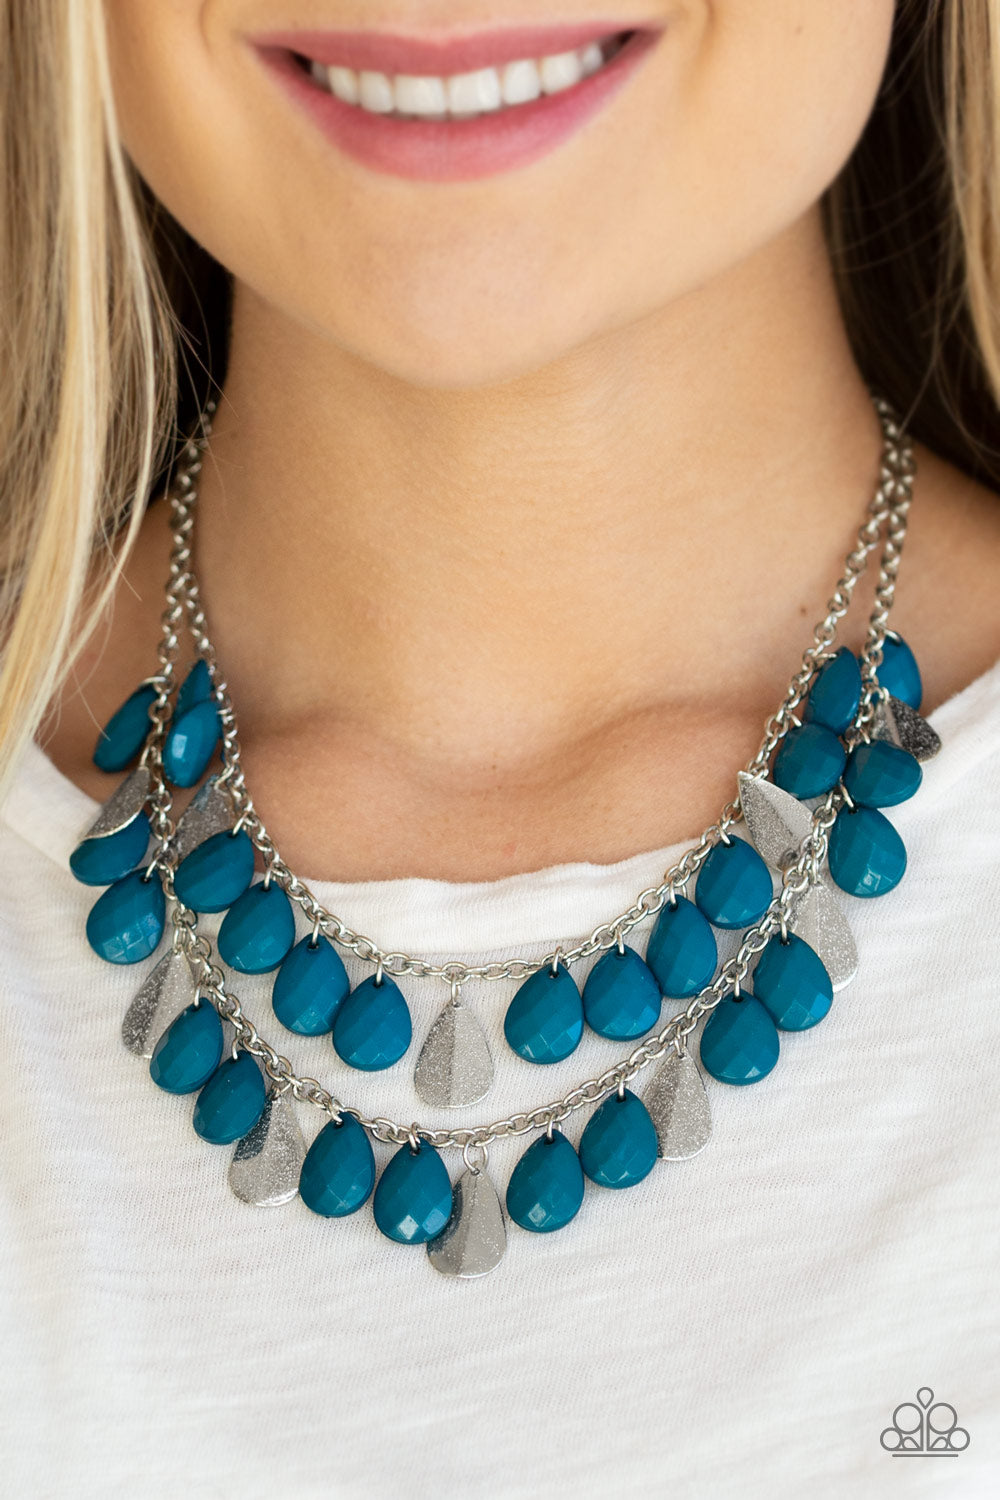 Paparazzi ♥ Life of the FIESTA - Blue ♥ Necklace – LisaAbercrombie